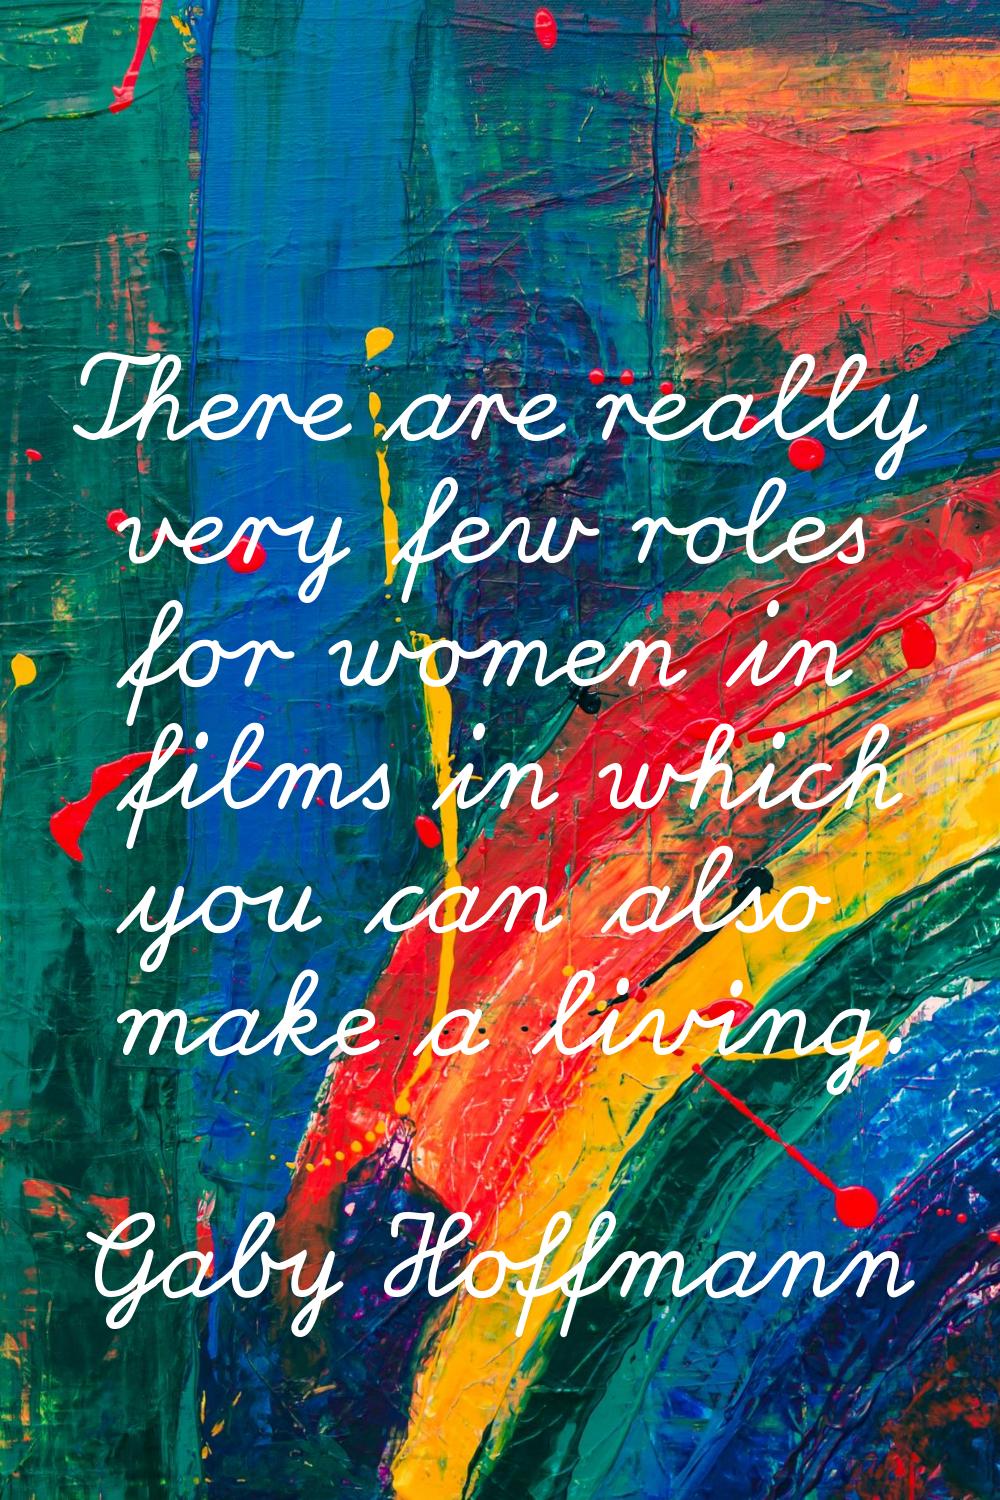 There are really very few roles for women in films in which you can also make a living.